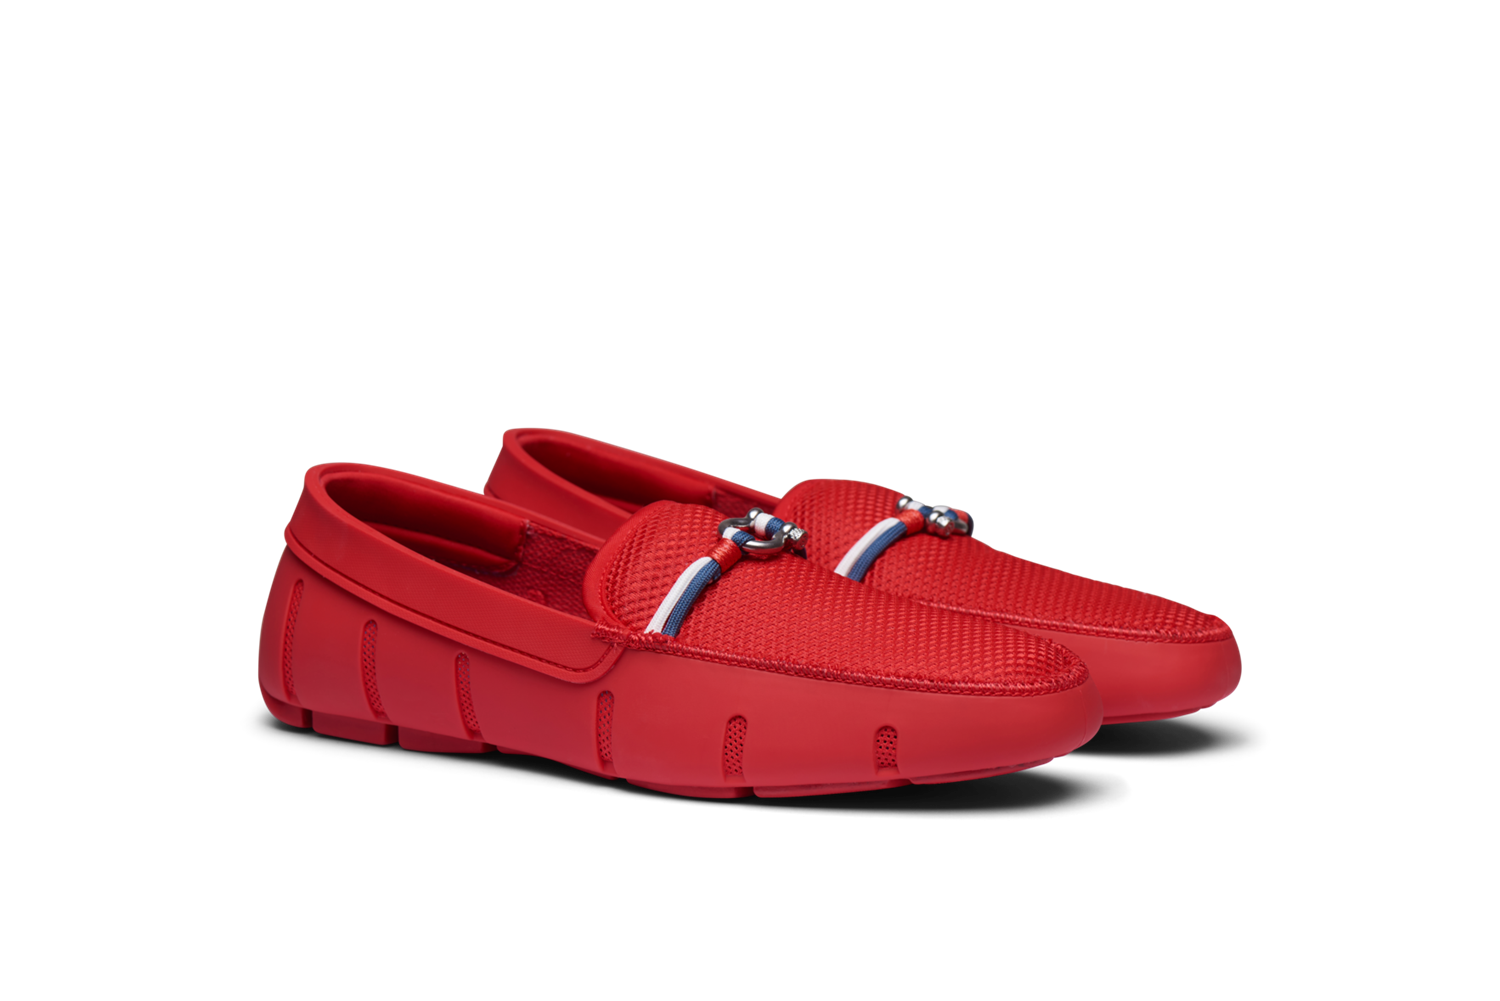 Riva Loafer Red